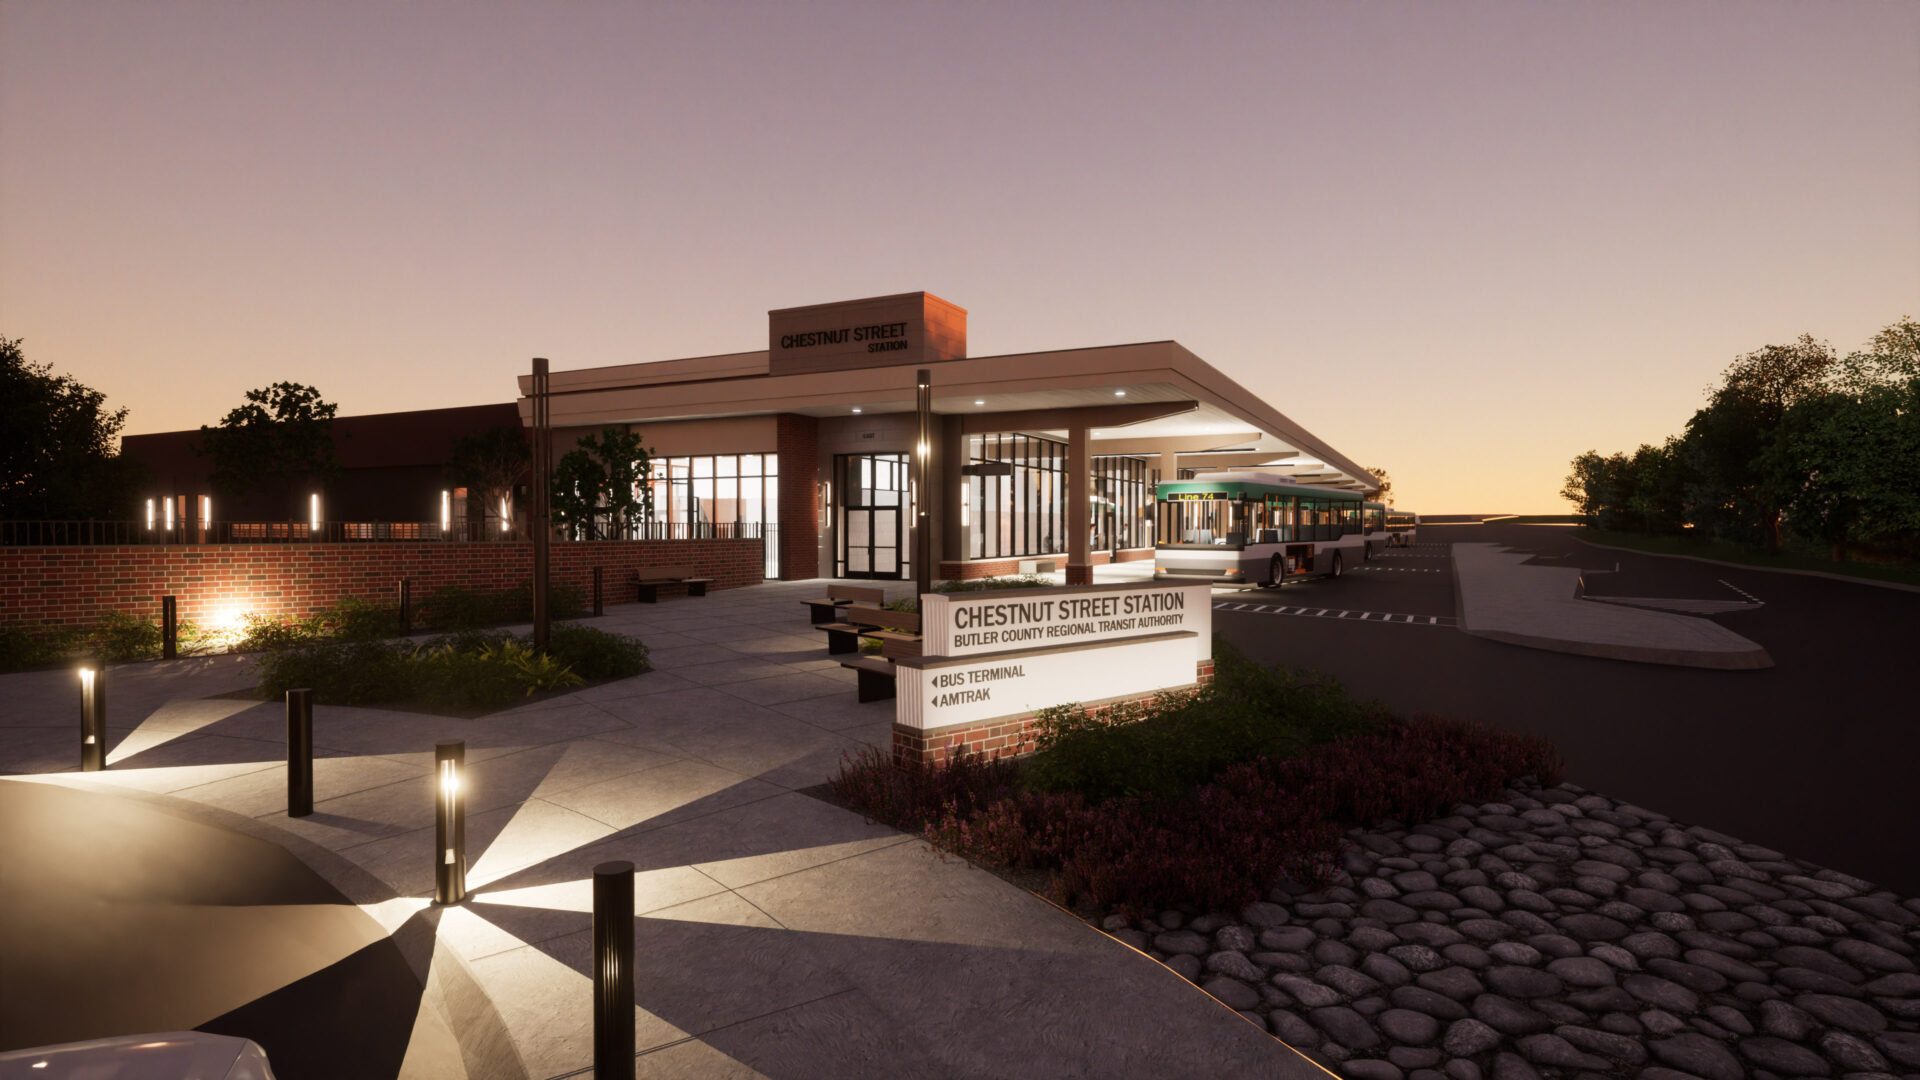 Night time exterior rendering of portico and main entrance